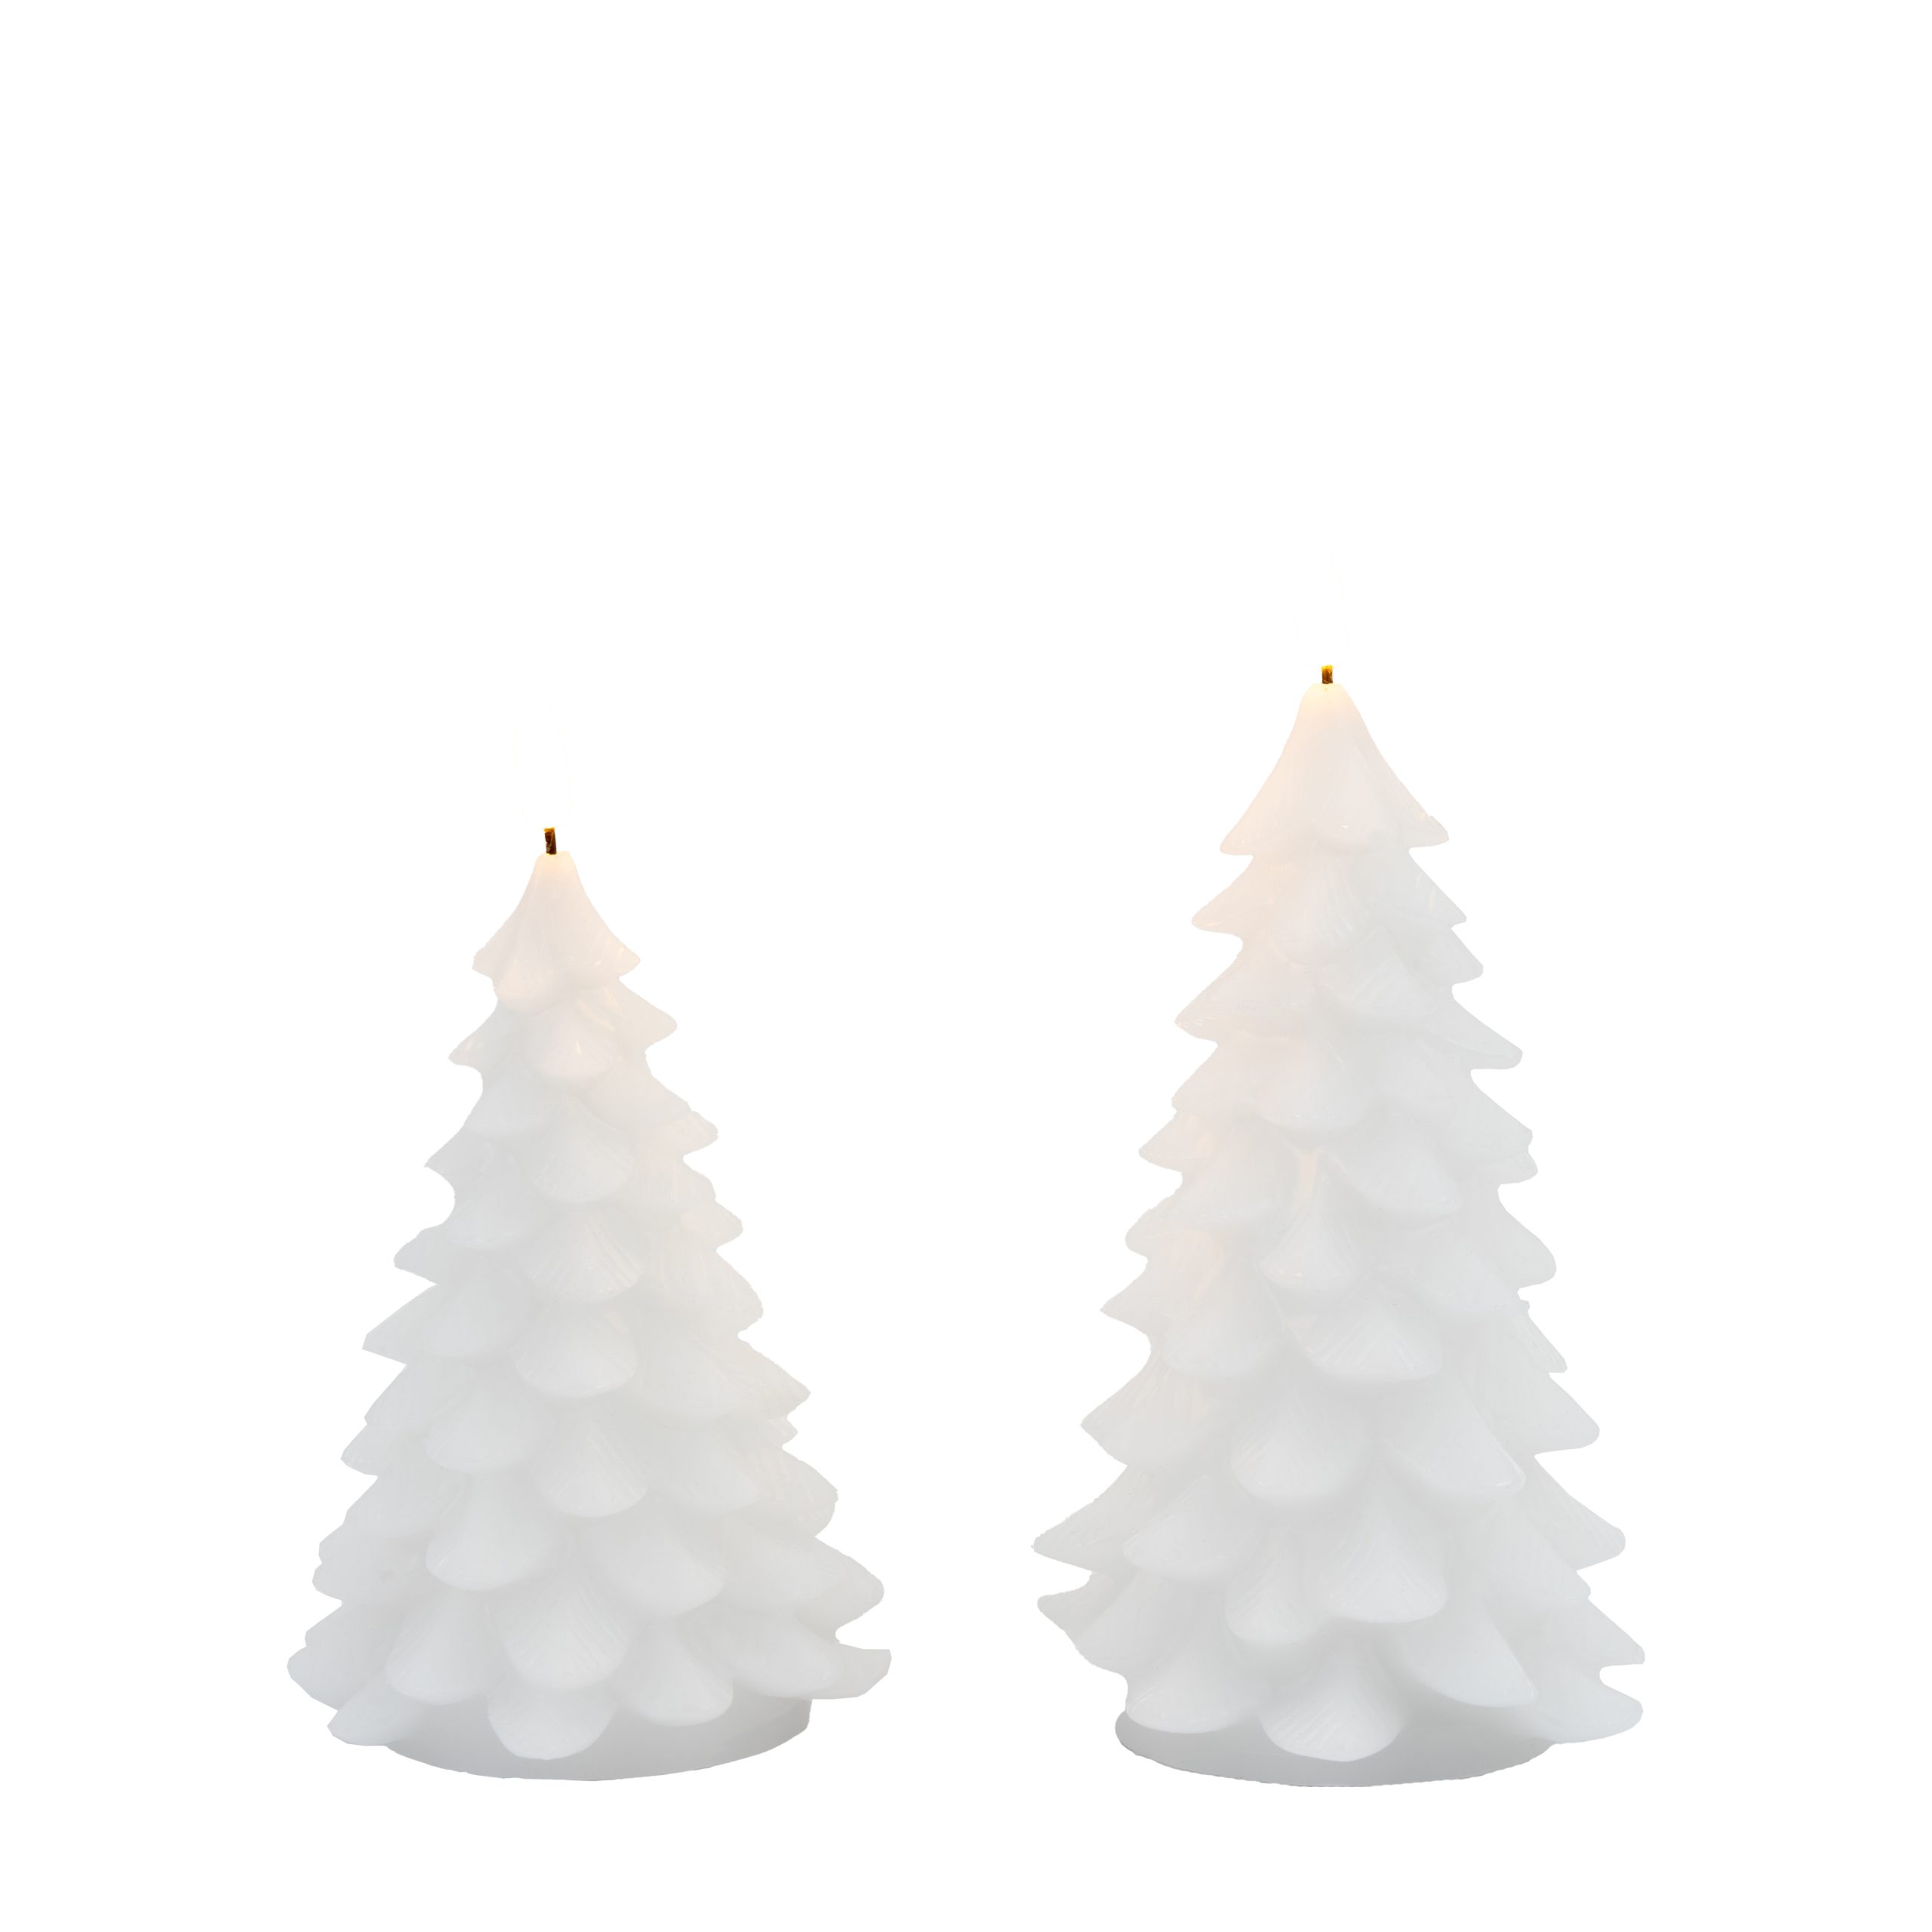 Gallery Direct LED Xmas Tree Candle (2 pack) White